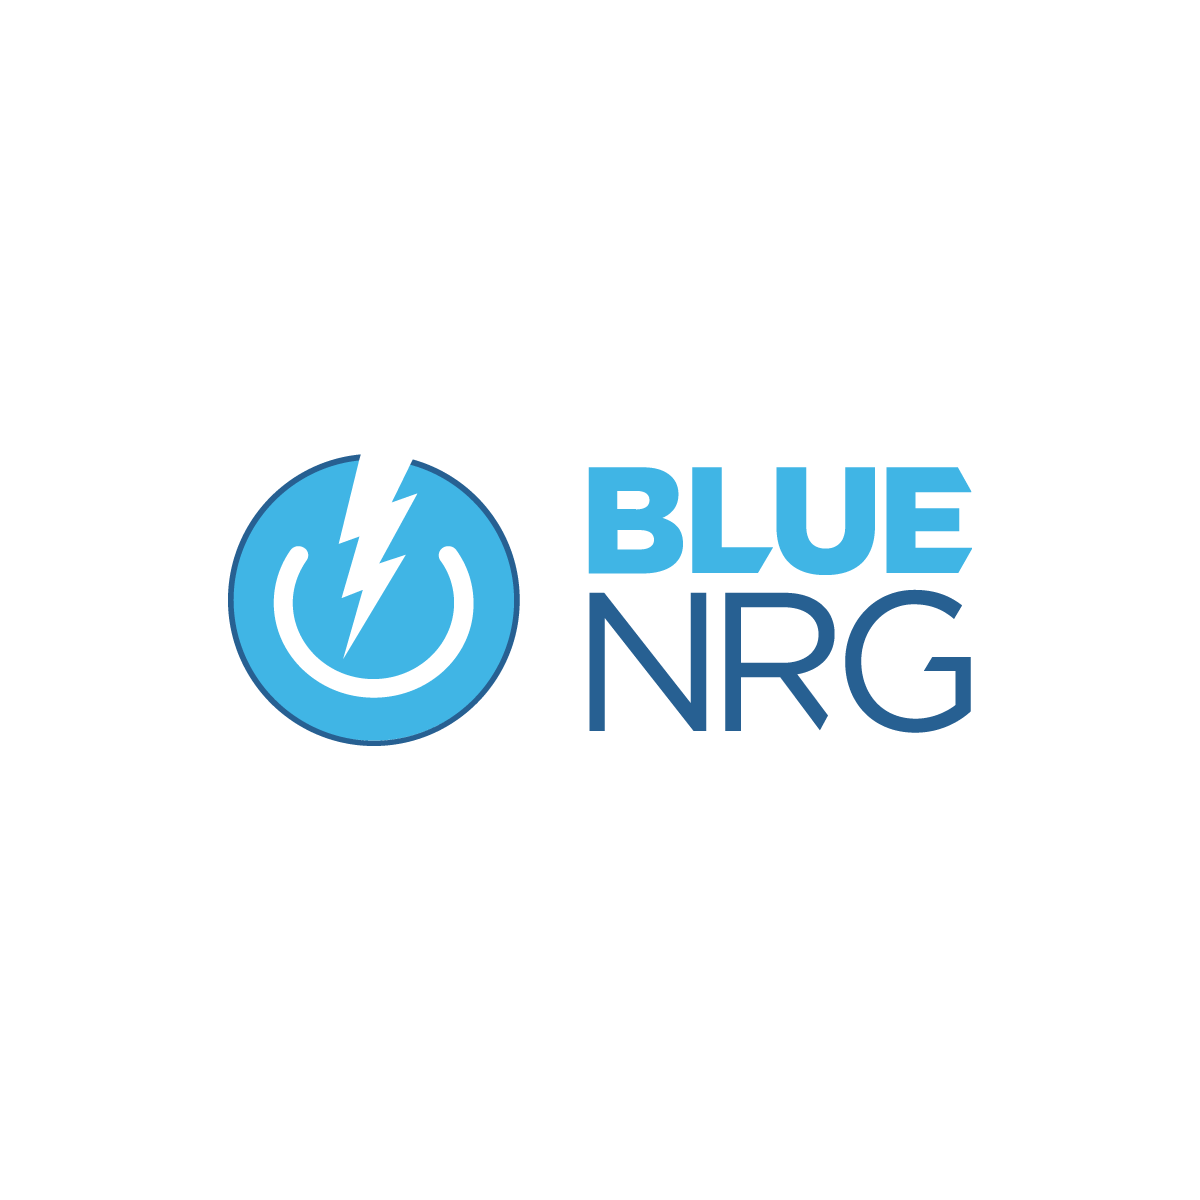 NRG Logo - Business Electricity Provider in VIC, NSW and SA